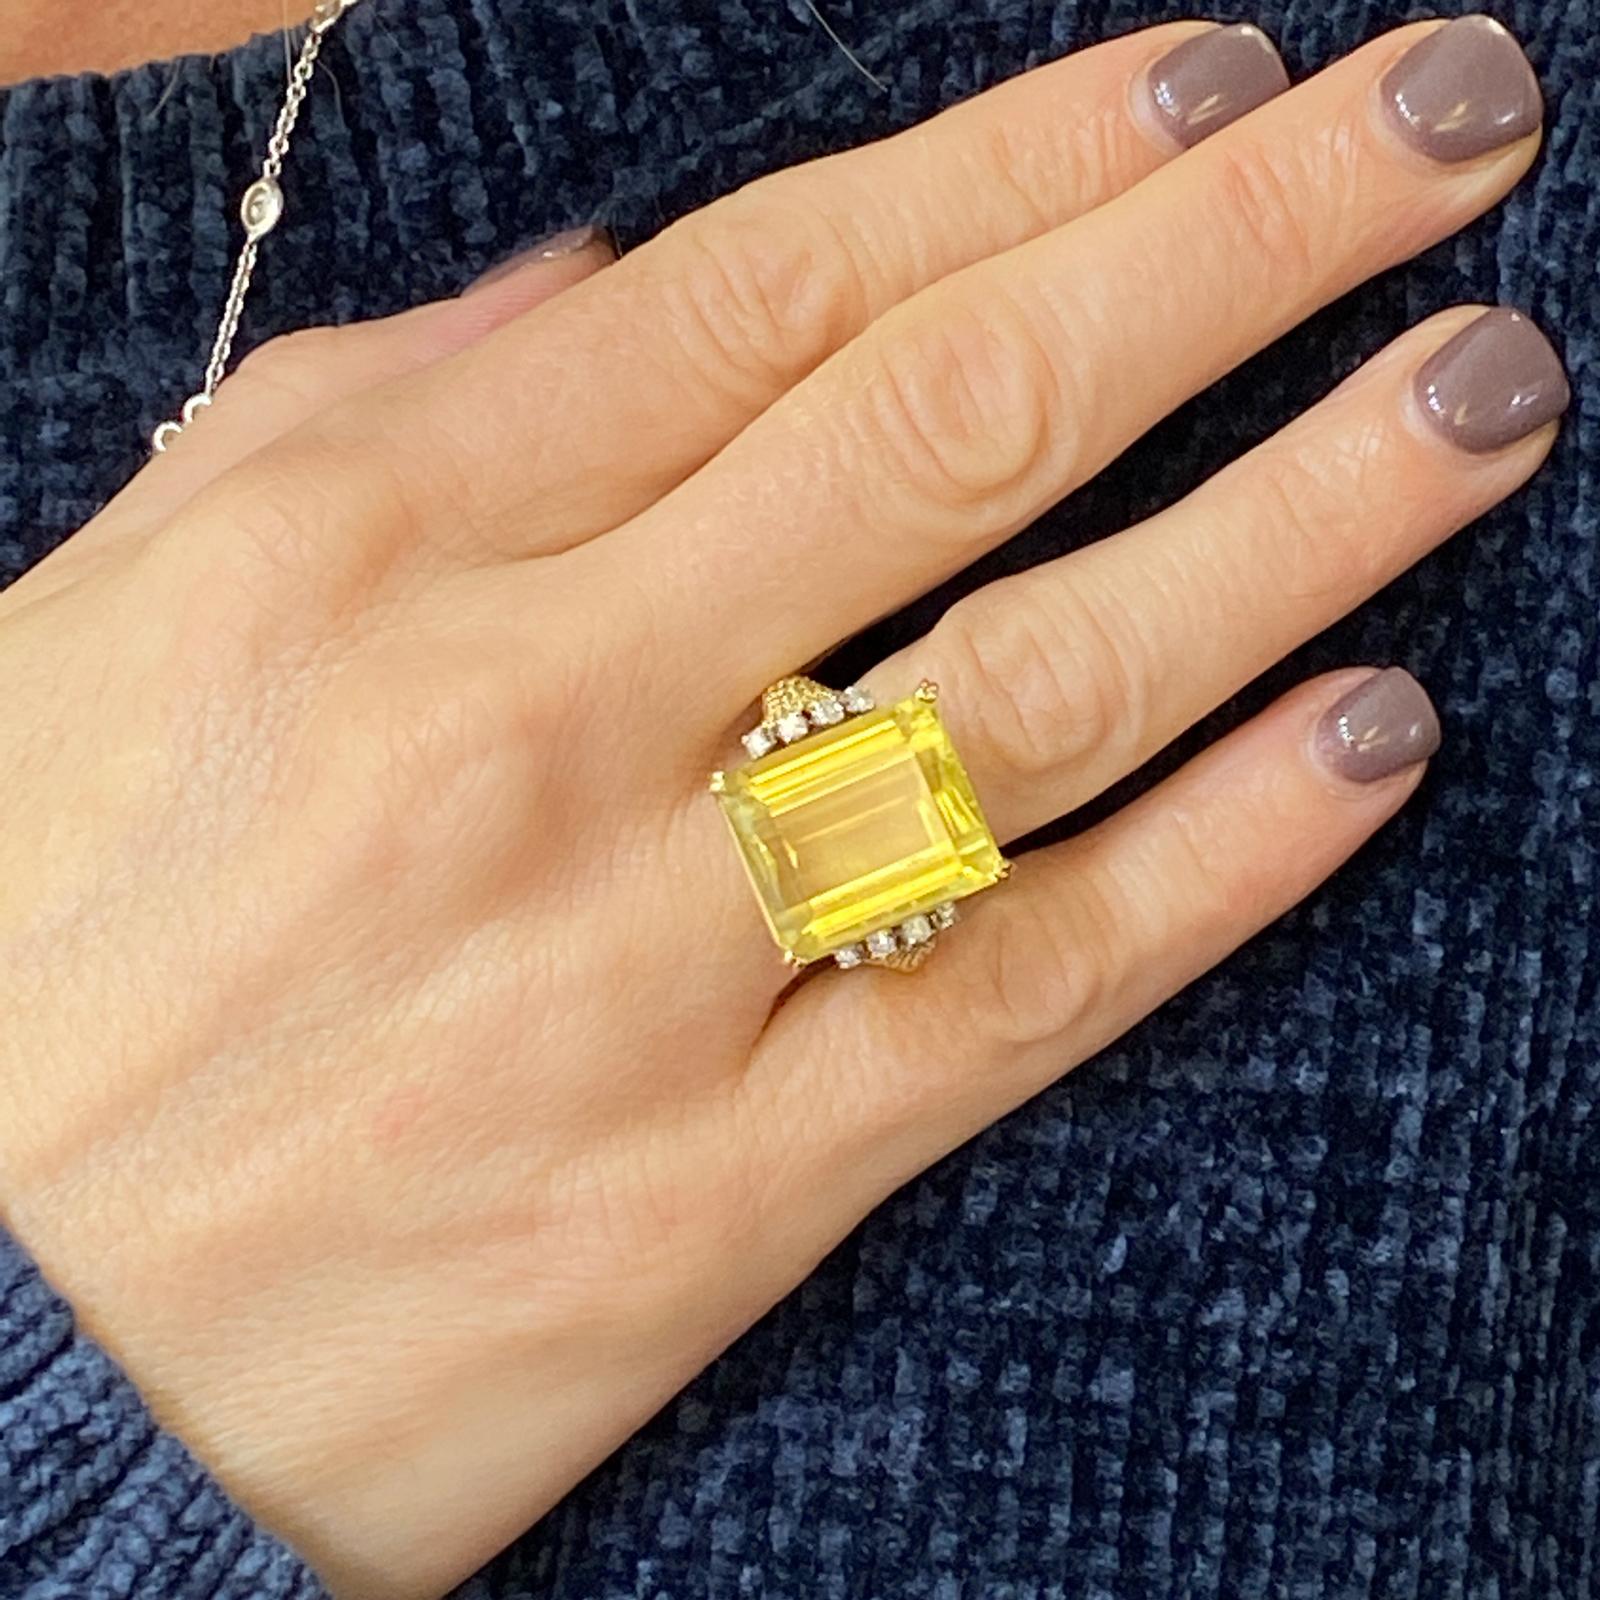 1970's citrine diamond cocktail ring fashioned in 18 karat yellow gold. The emerald cut lemon citrine weighs approximately 15 carats and features a beautiful bright yellow color. The citrine is surrounded by 8 round brilliant cut diamonds weighing